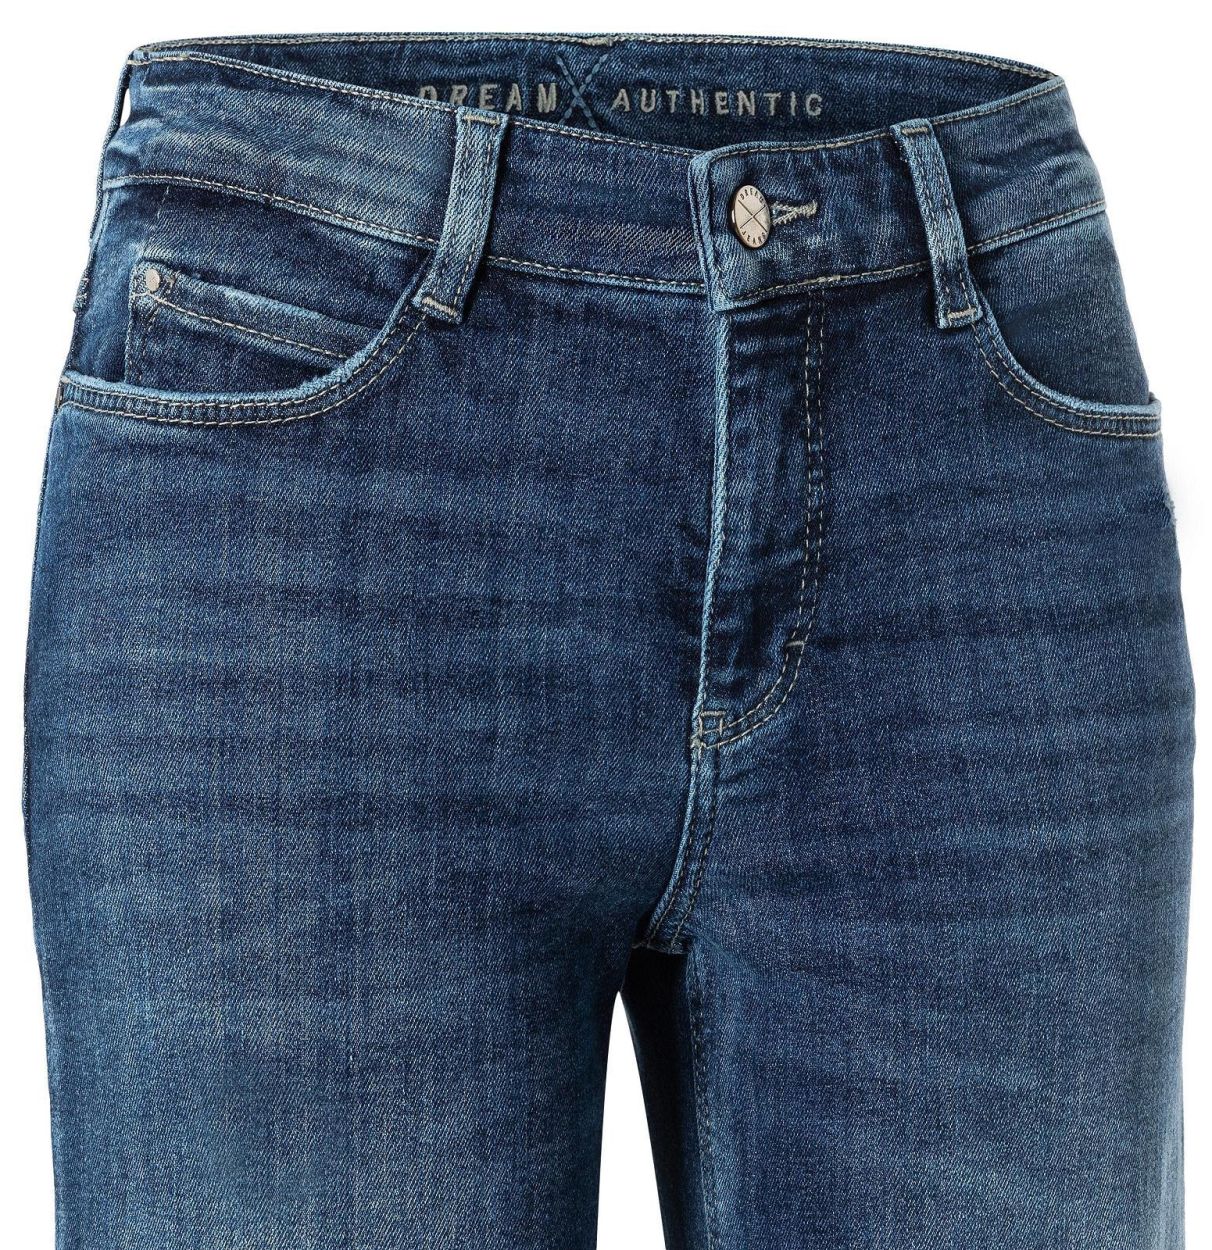 MAC Dream Wide Authentic Jeans